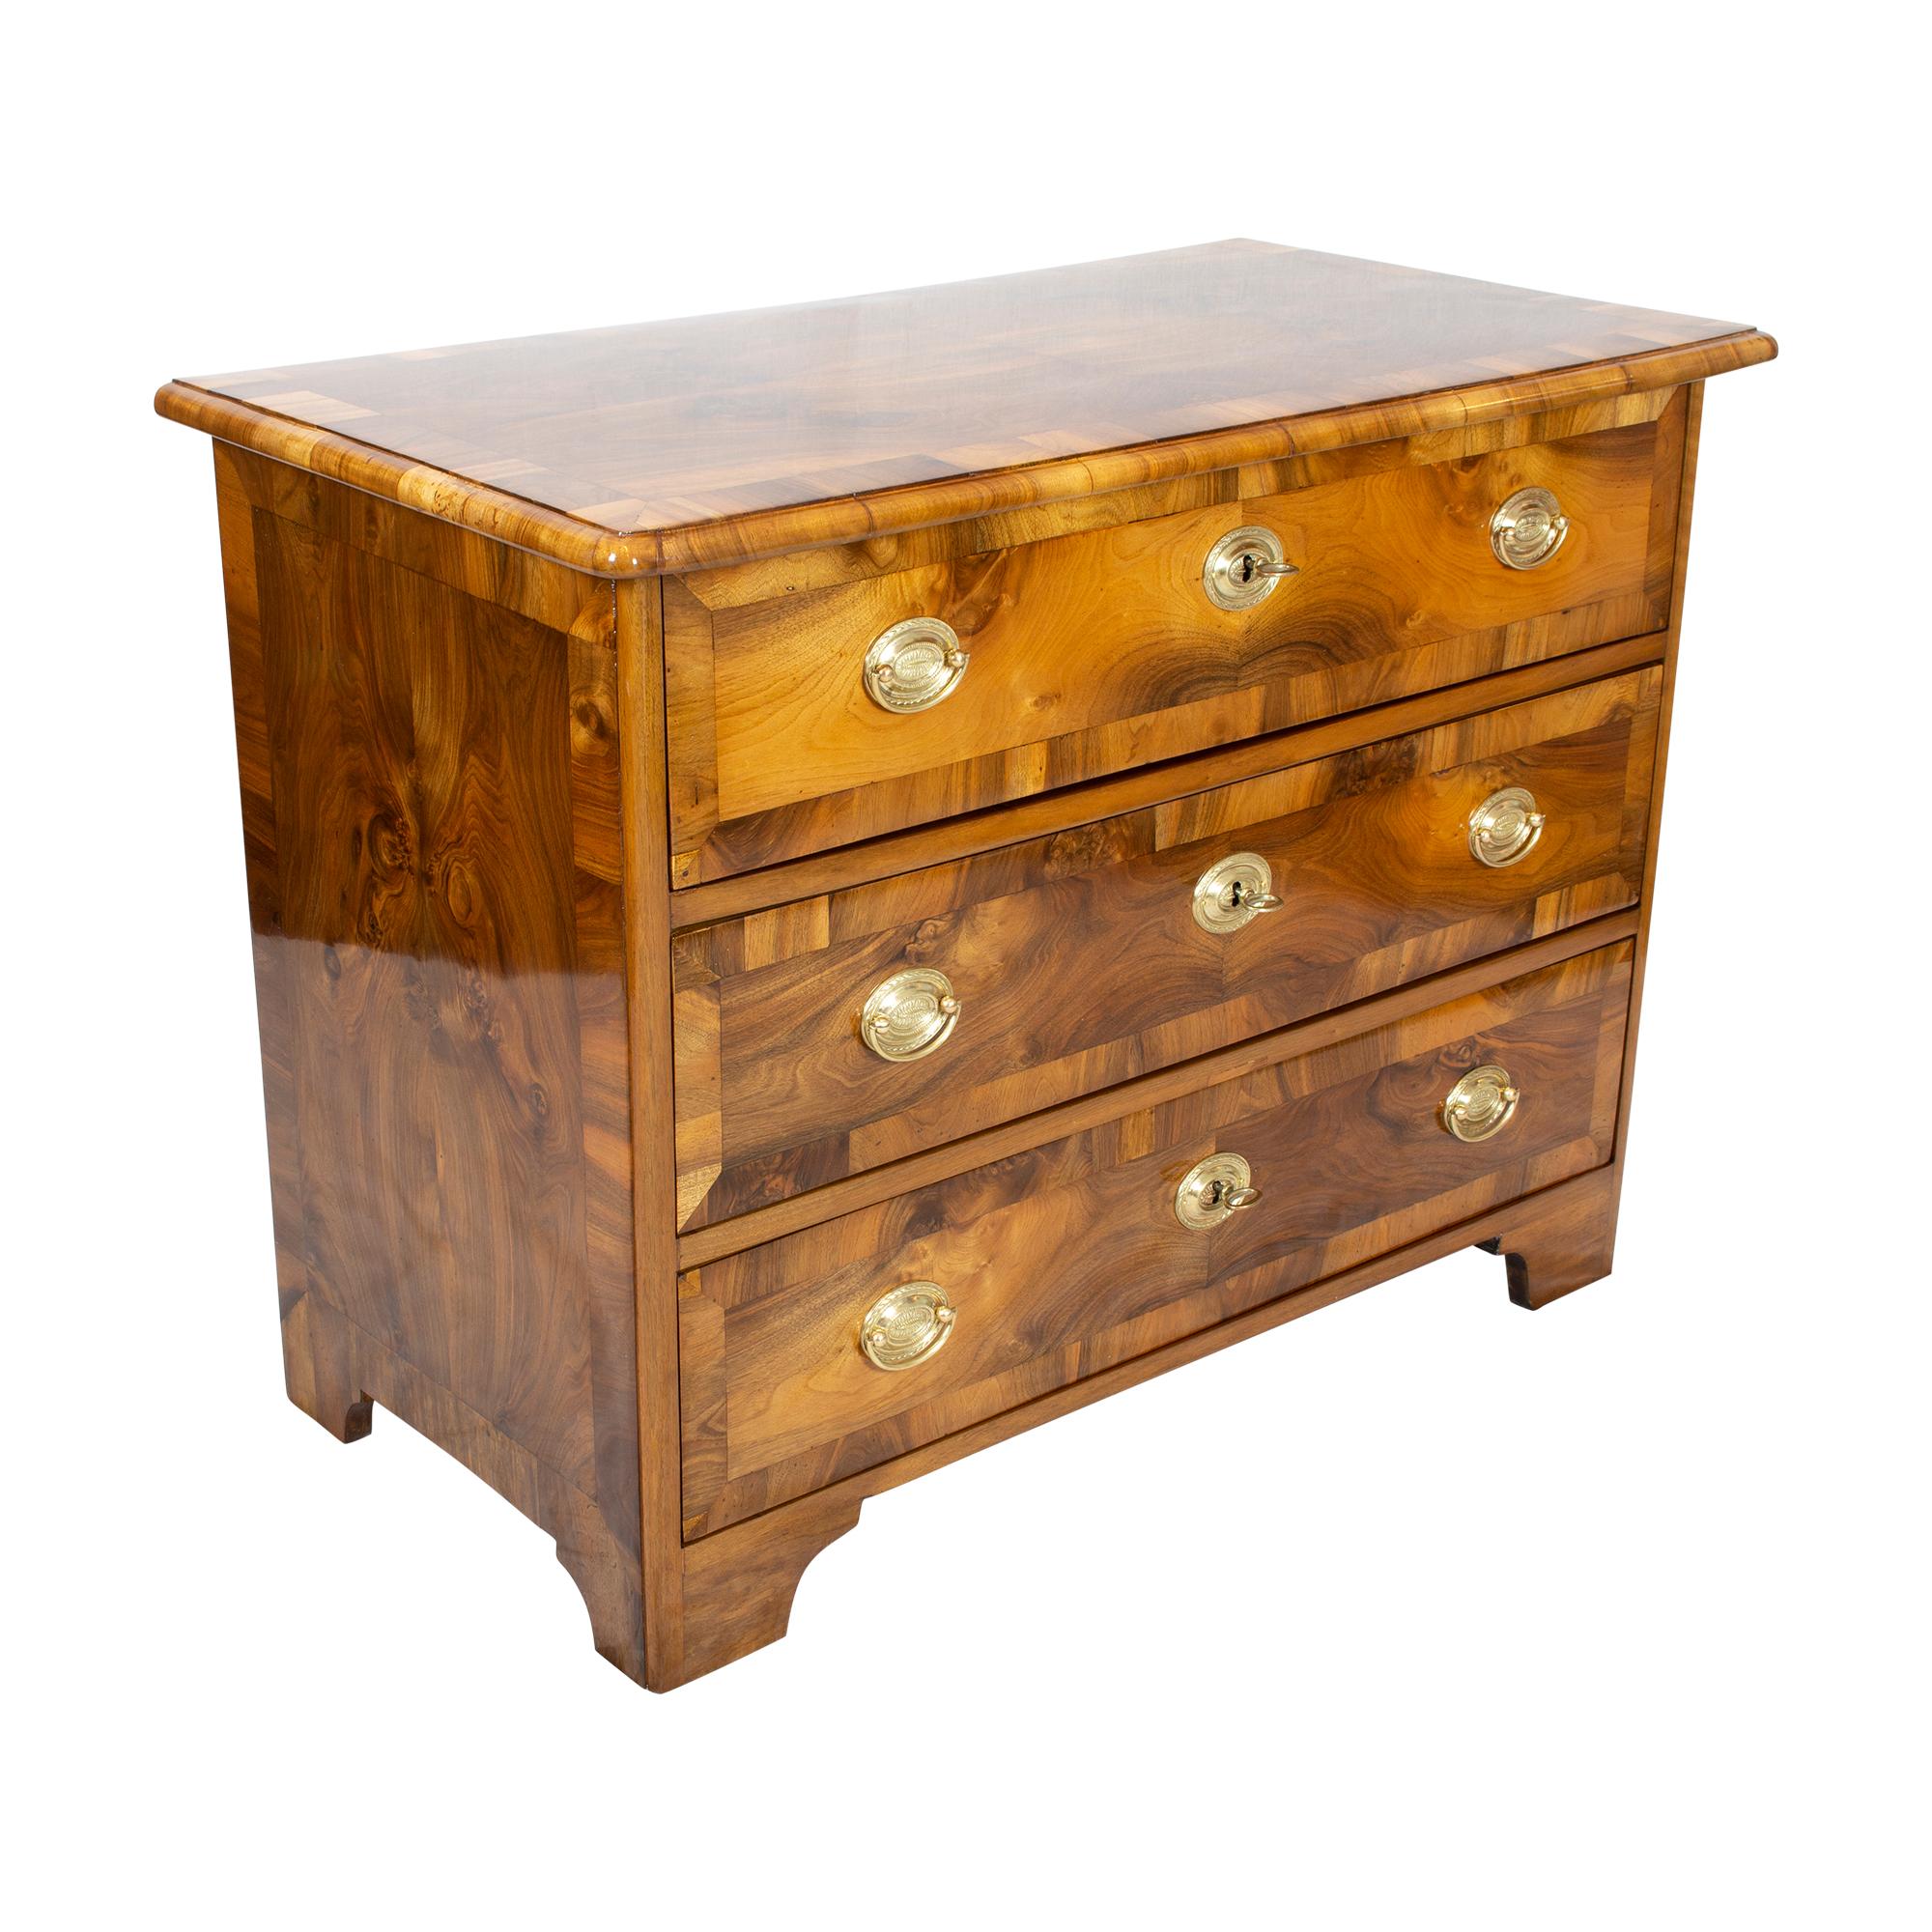 An 18th century Louis XVI marquetry commode with three drawers from West Germany. Thick walnut veneer sawn with frame in walnut on a spruce wood corpus. All keys, fittings are made of brass, the locks are from the time. It is a beautiful piece of